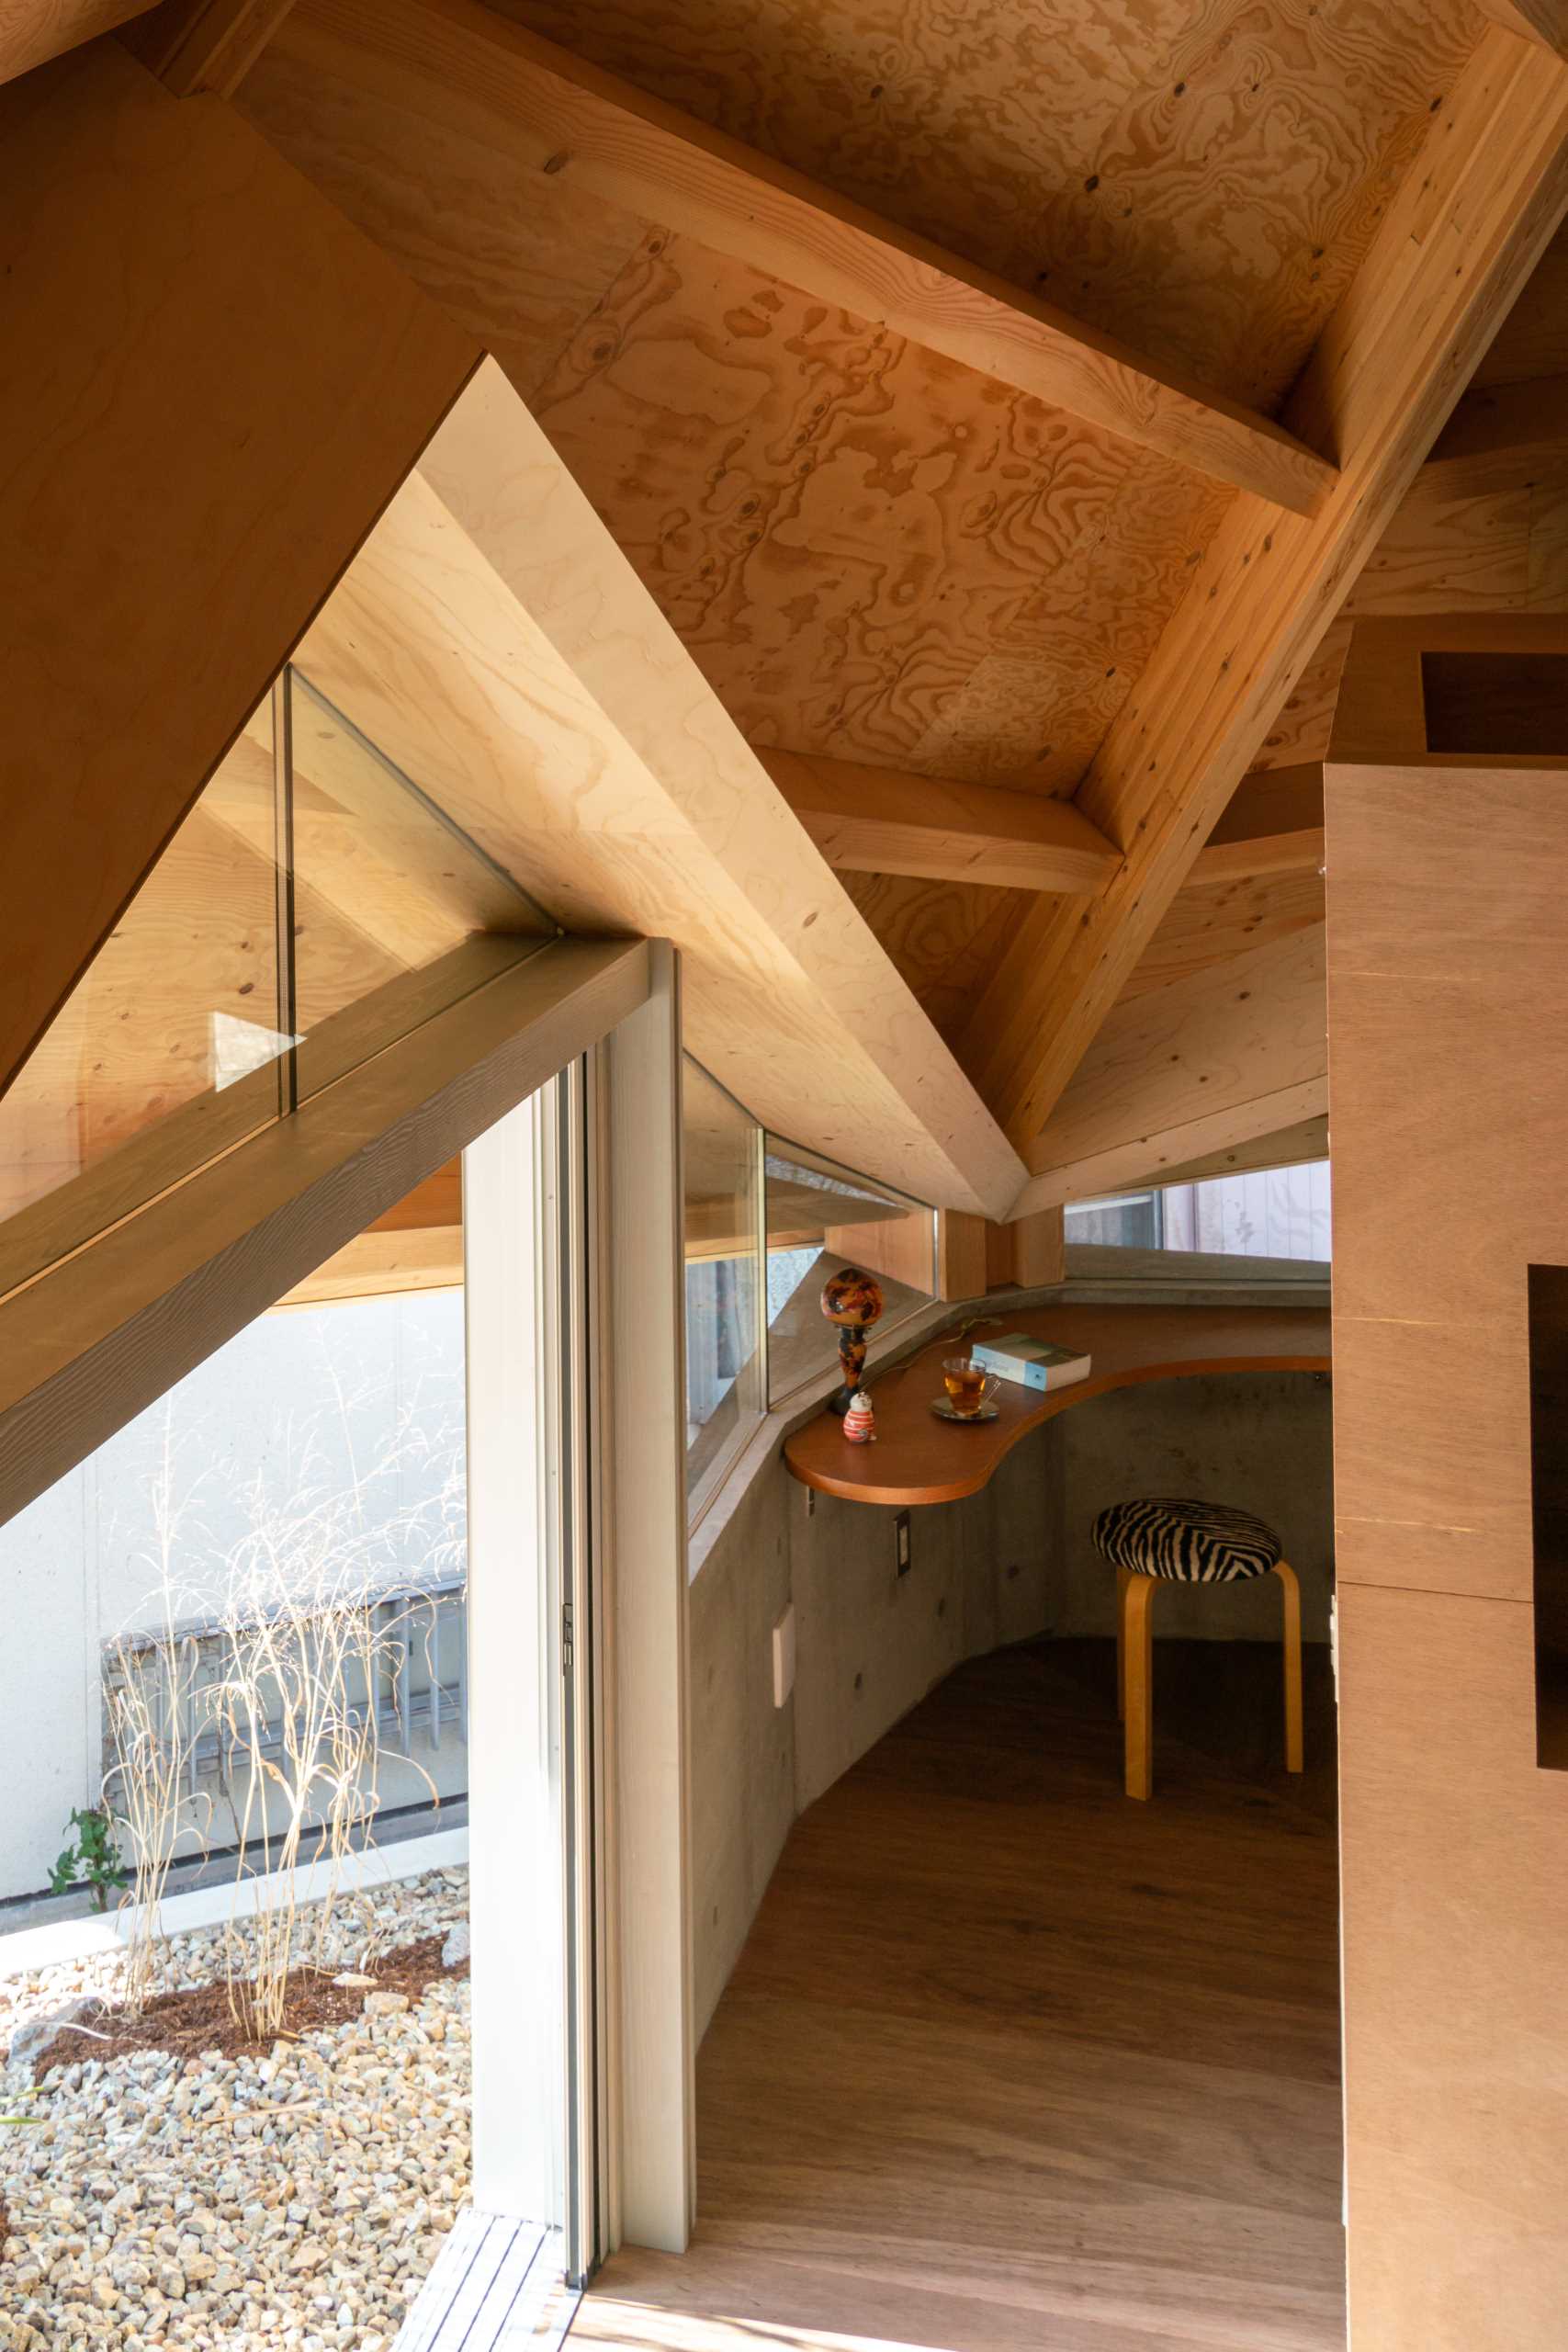 A built-in desk tucked into a corner of an octagonal-shaped home.